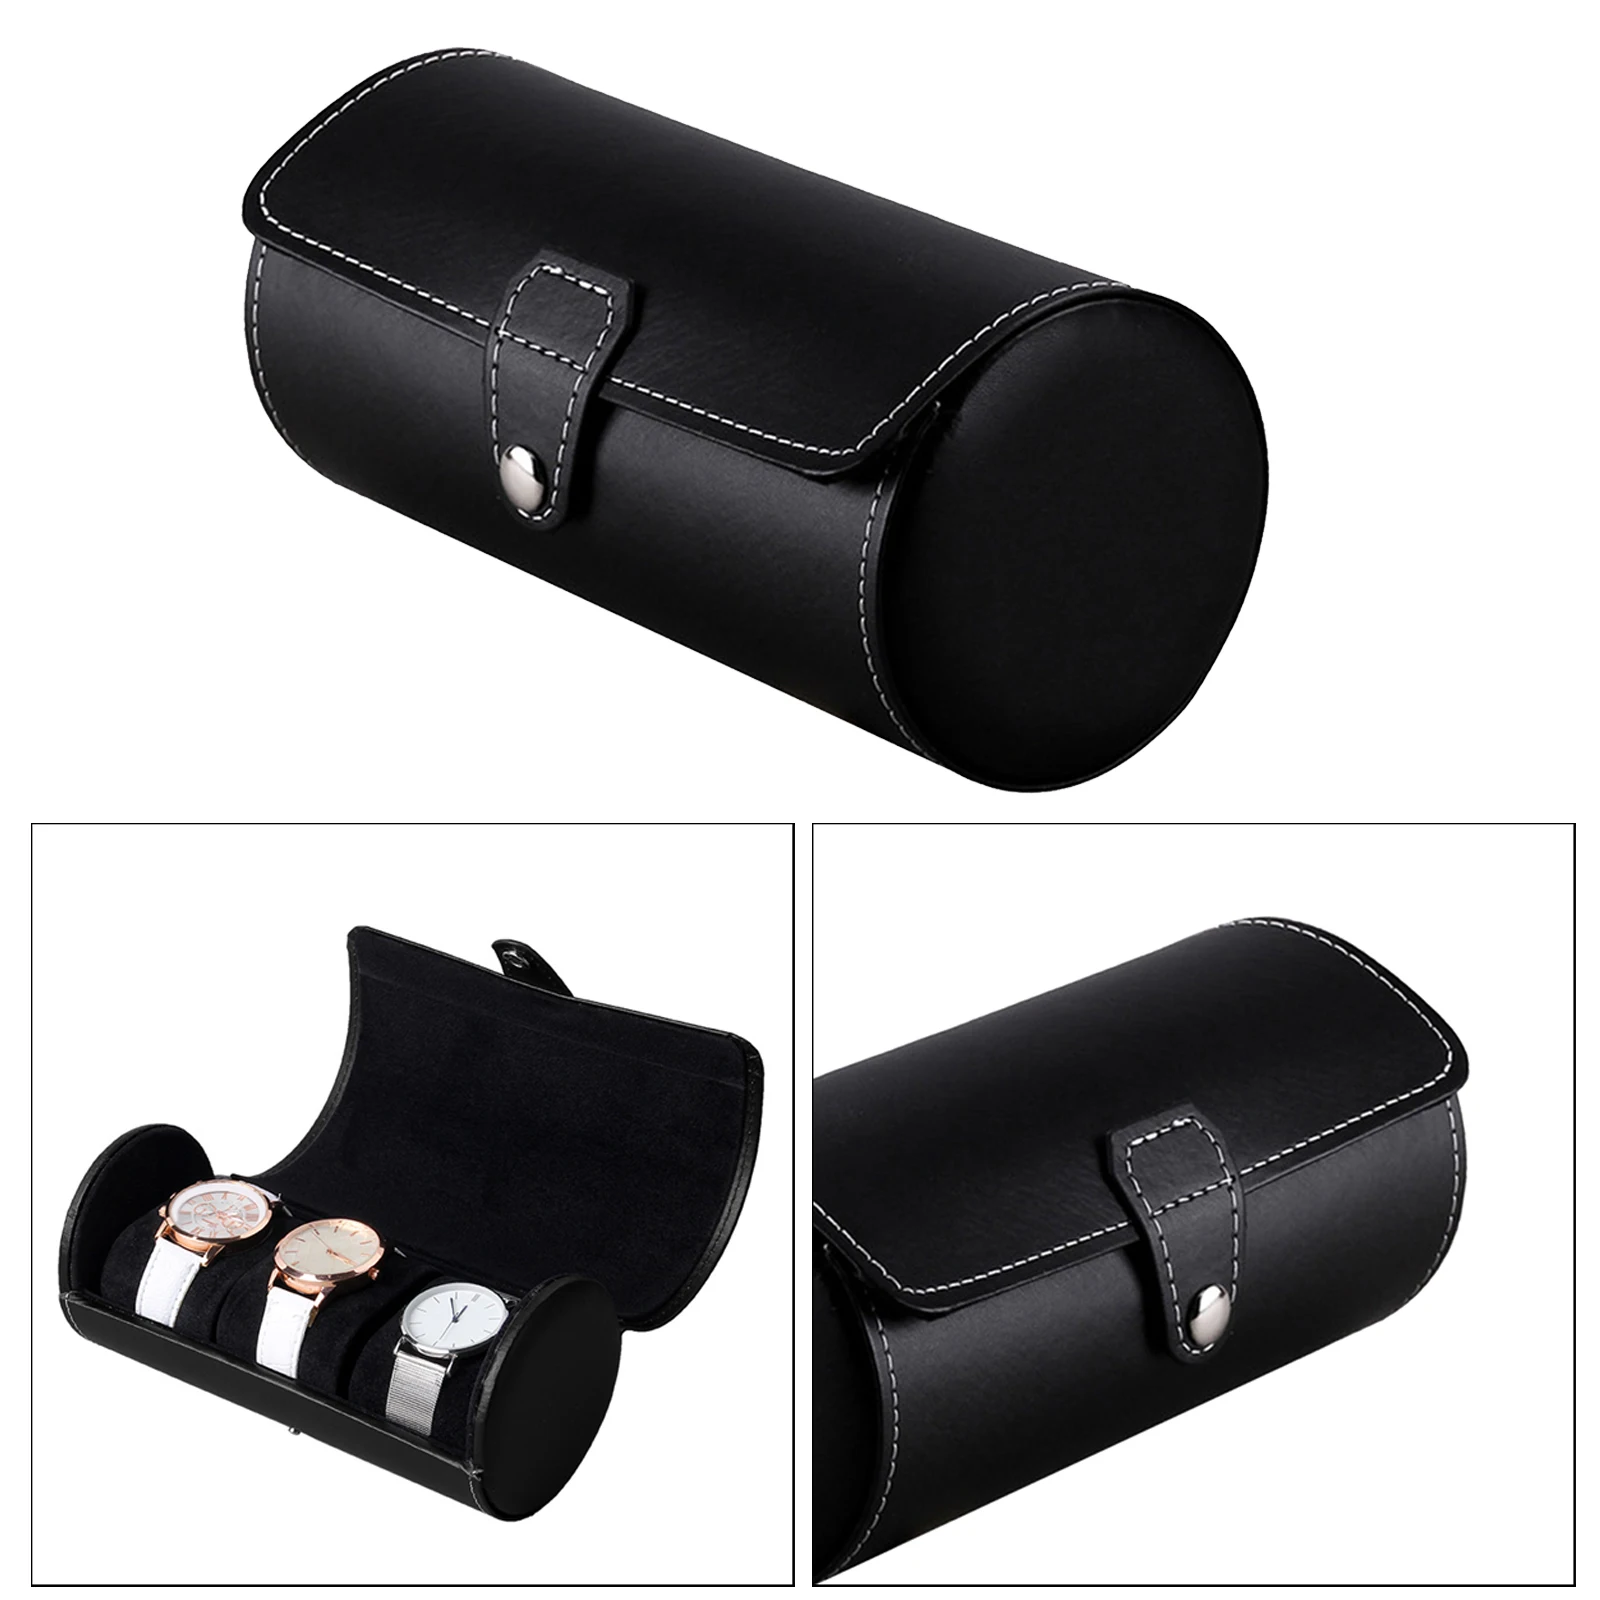 Universal 3 Slot PU Leather Watch Roll Case Box for Holder Storage Black